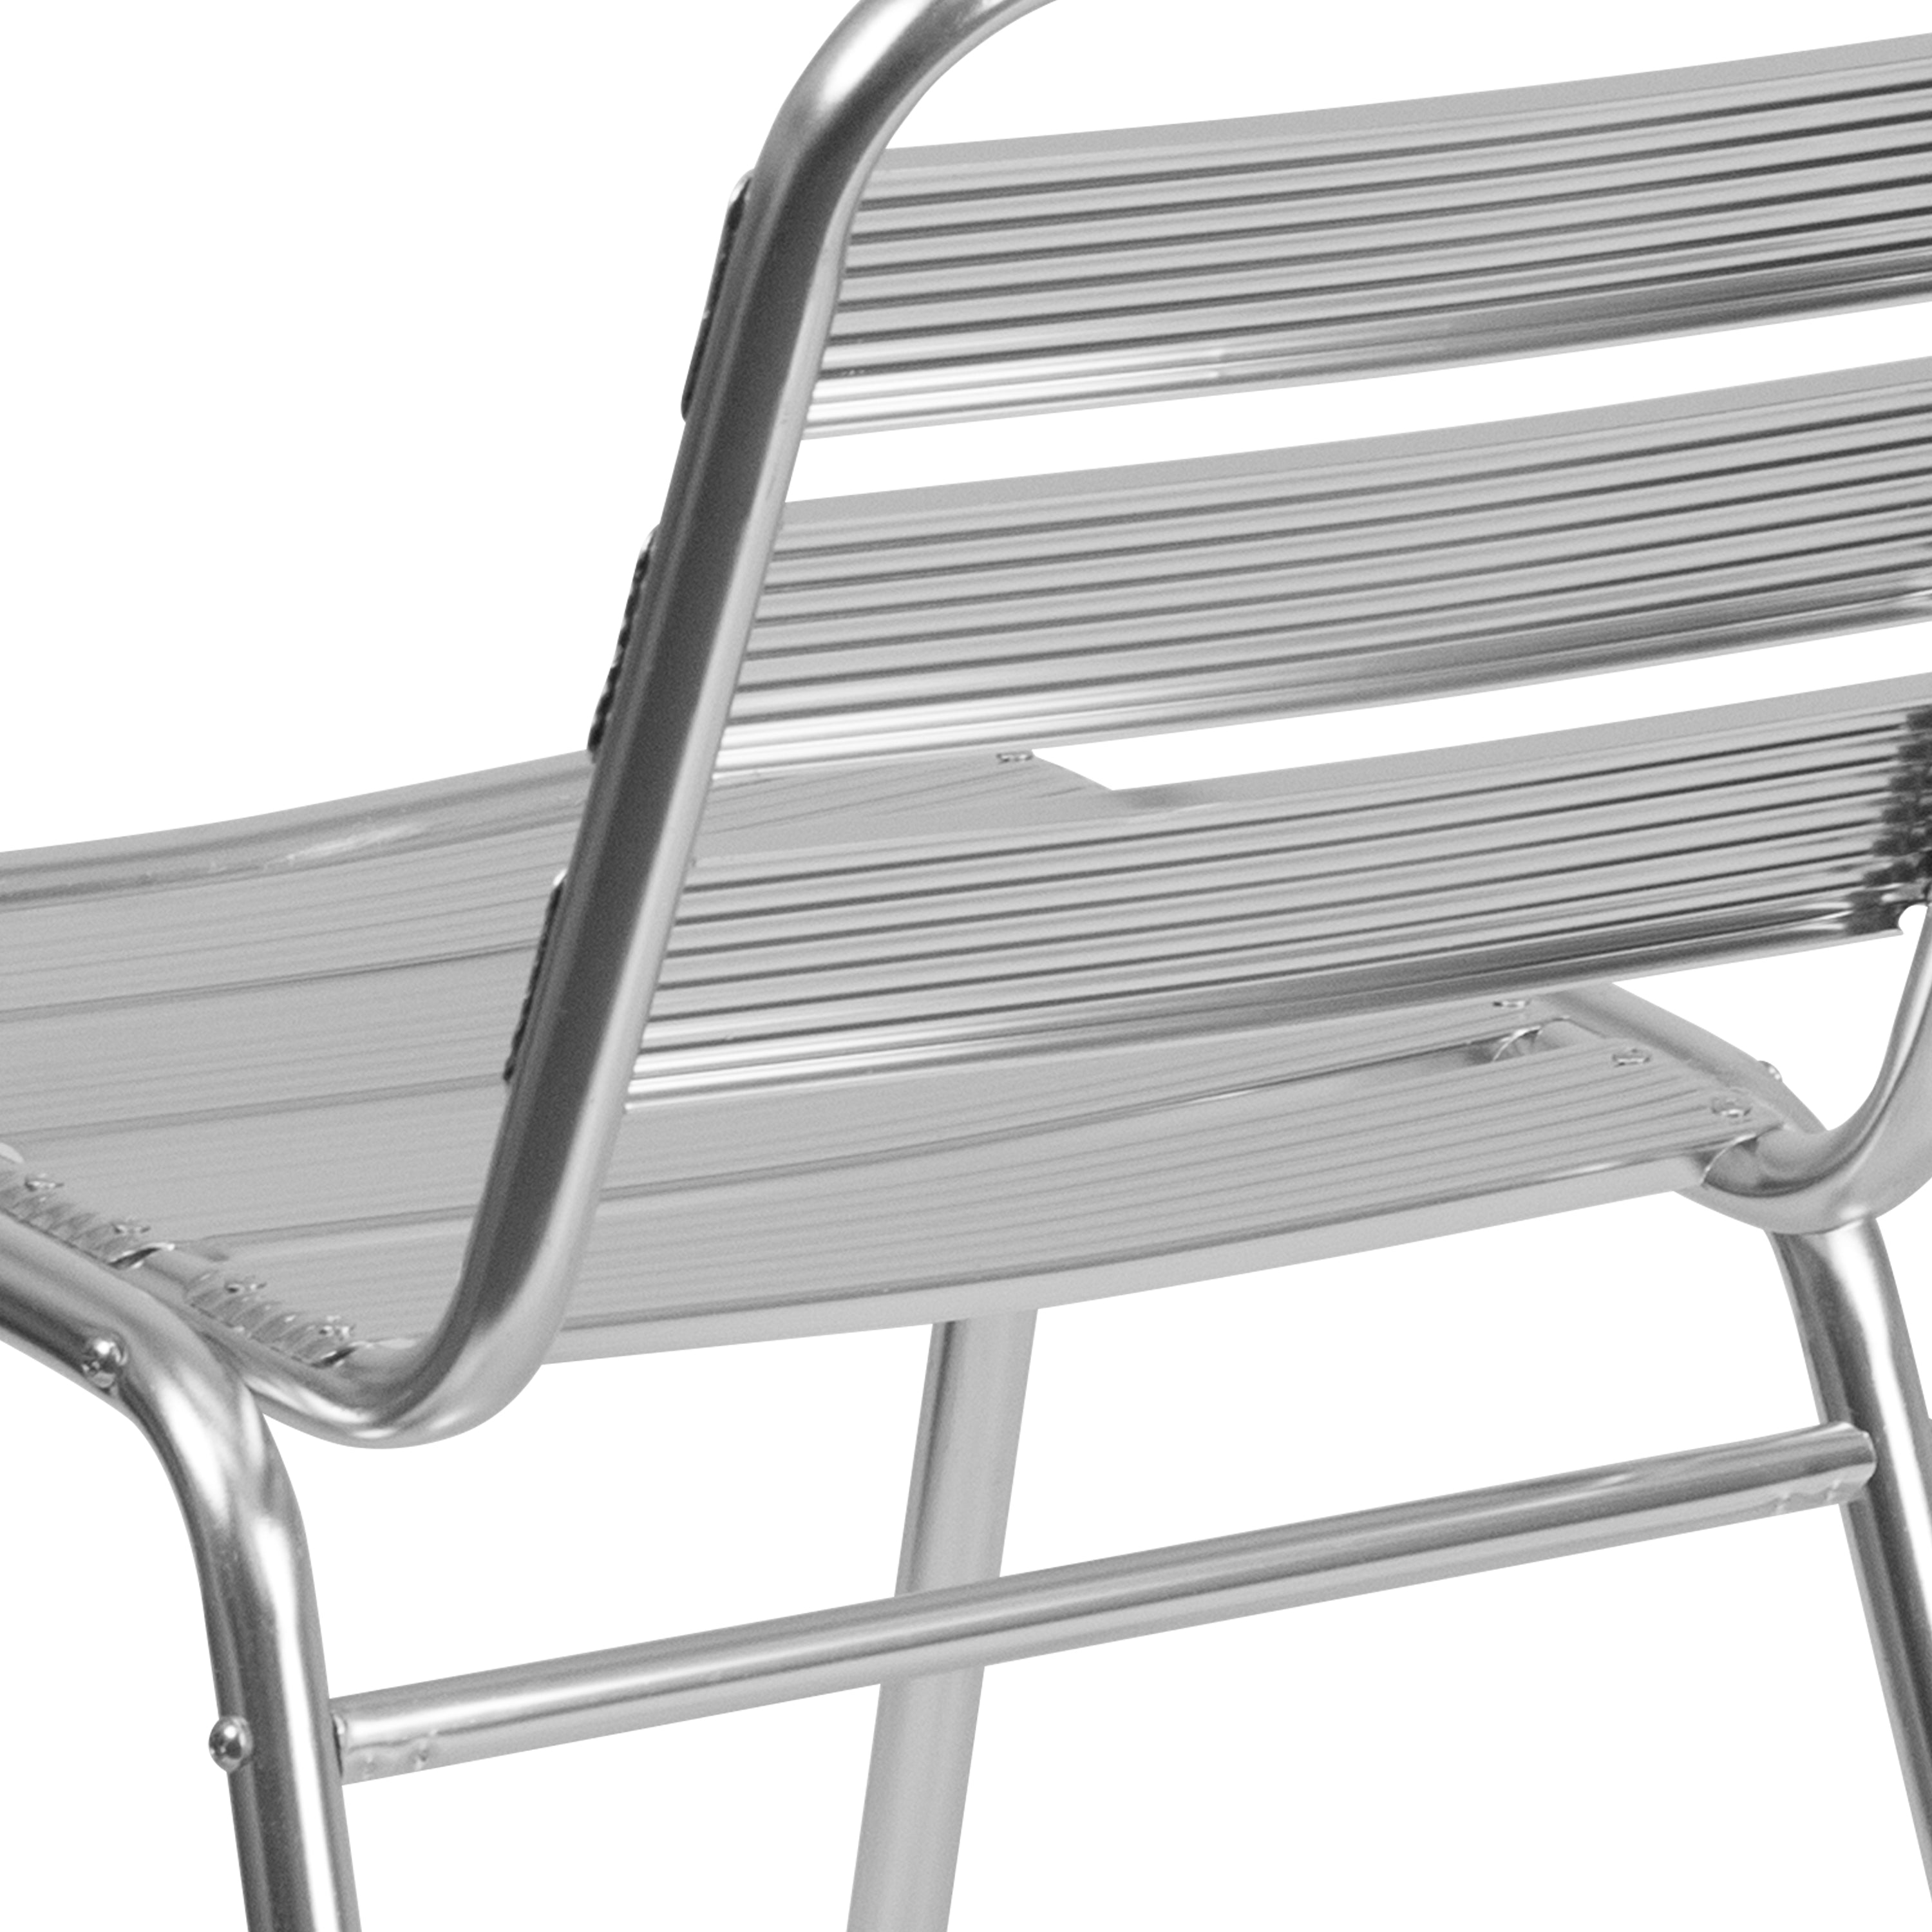 Lila Aluminum Commercial Indoor-Outdoor Armless Restaurant Stack Chair with Triple Slat Back-Indoor/Outdoor Chairs-Flash Furniture-Wall2Wall Furnishings